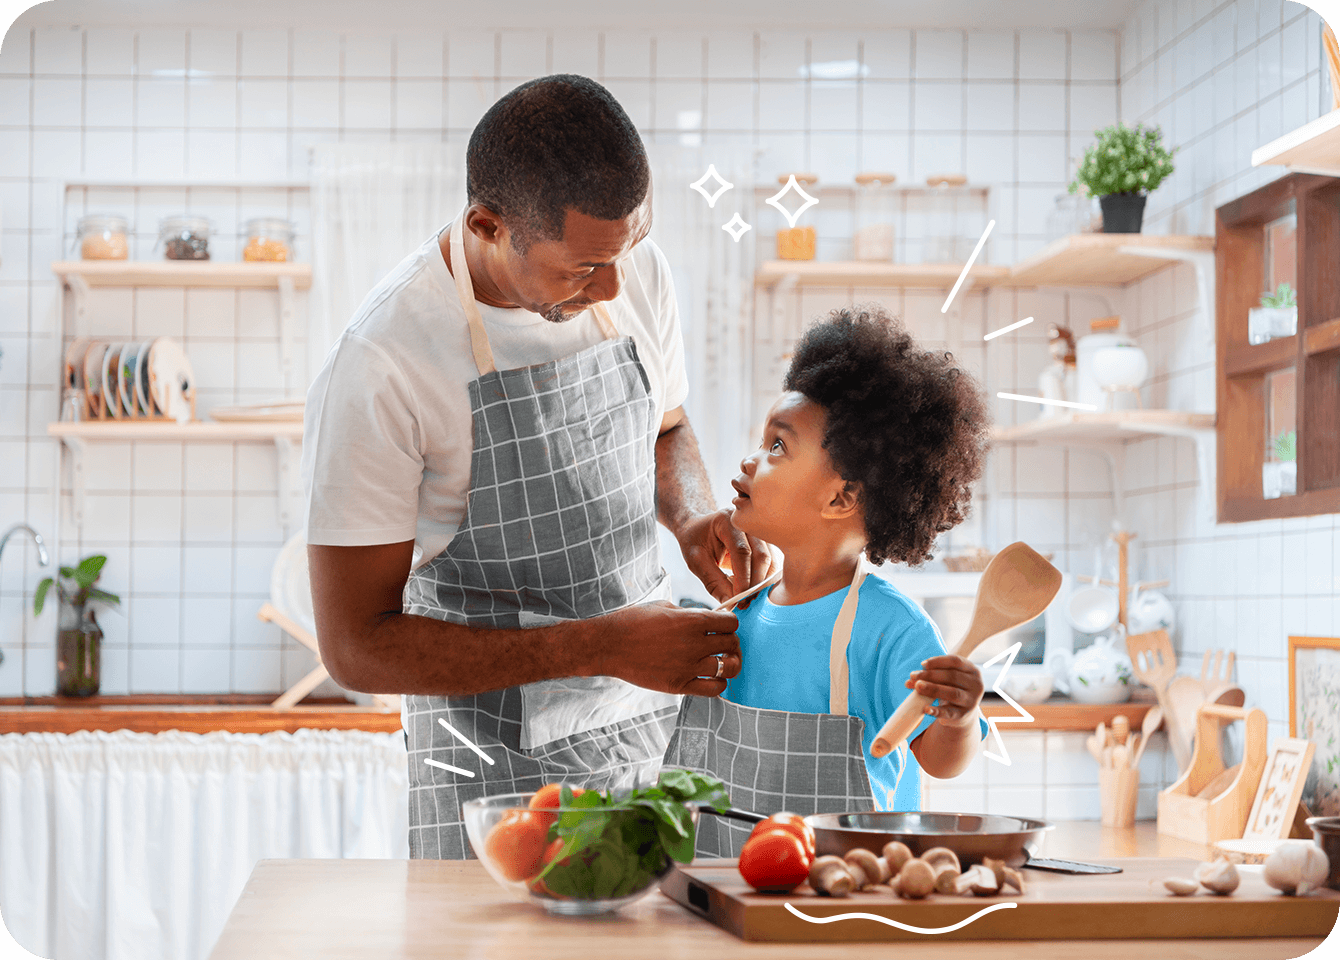 A father and daughter collaborate on cooking a meal